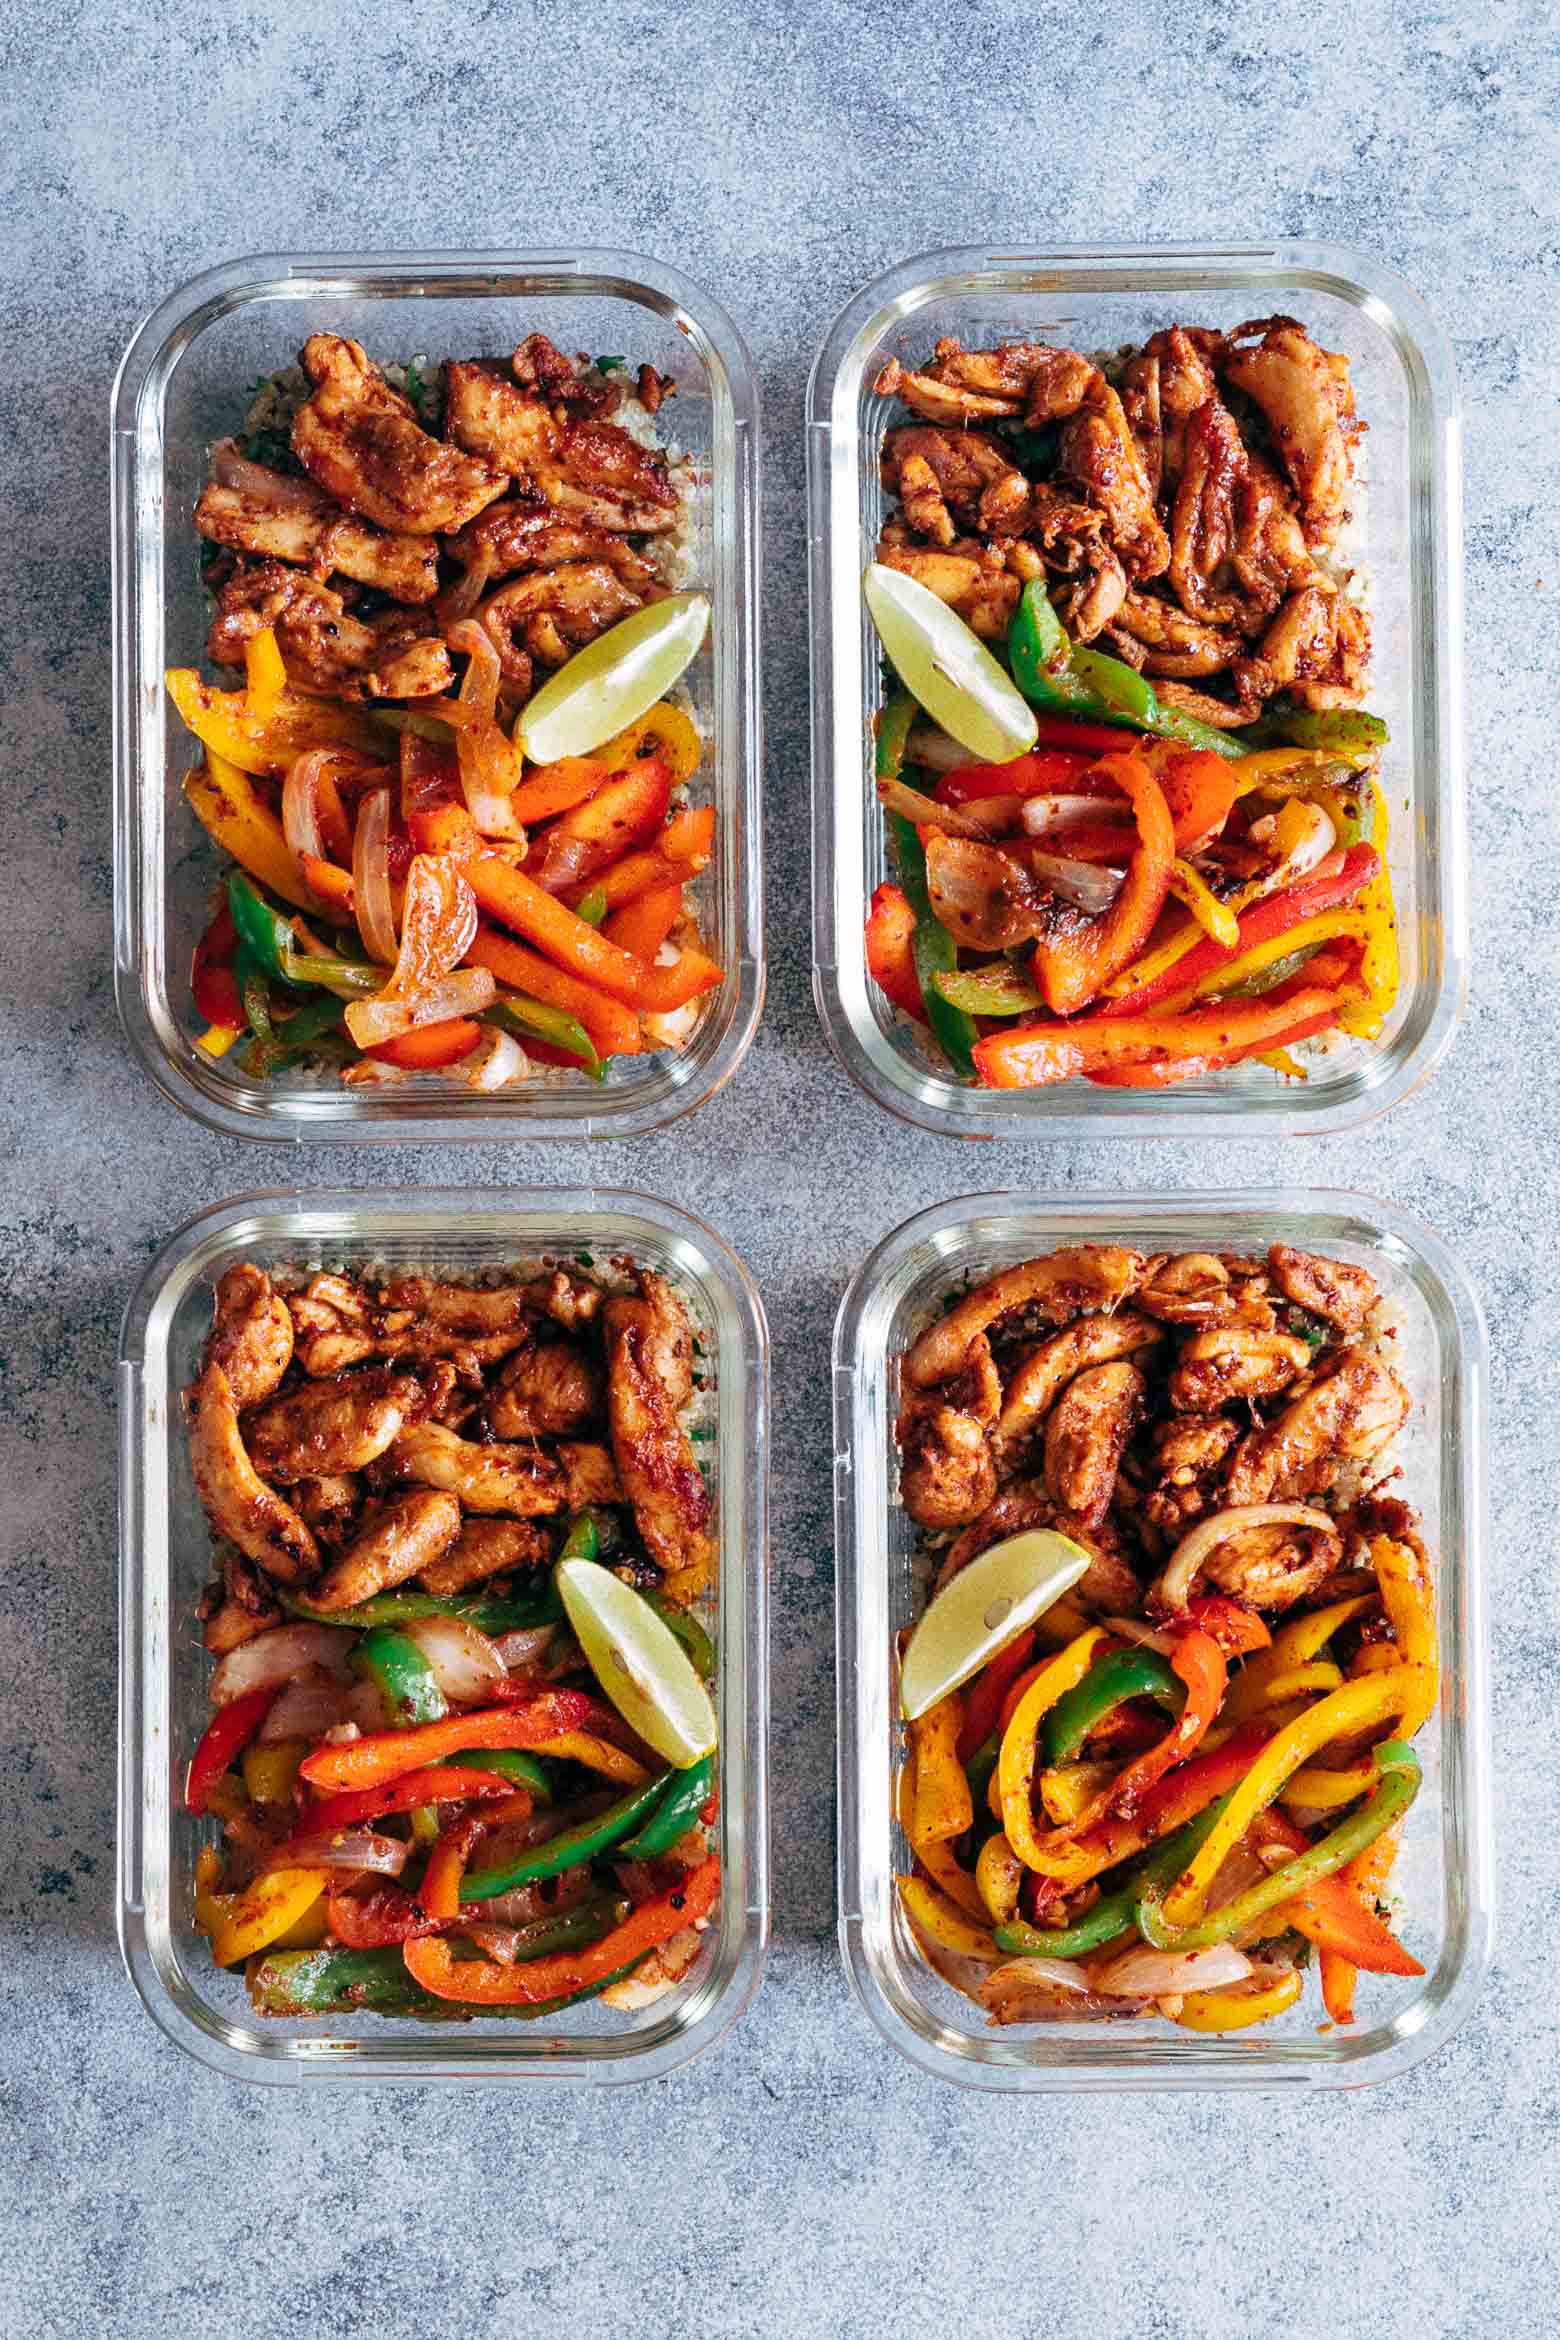 Chicken Fajita Meal Prep Lunch Bowls are teamed with cilantro lime quinoa and is a healthy, tasty, fast recipe to make lunch prep for weekdays super easy!